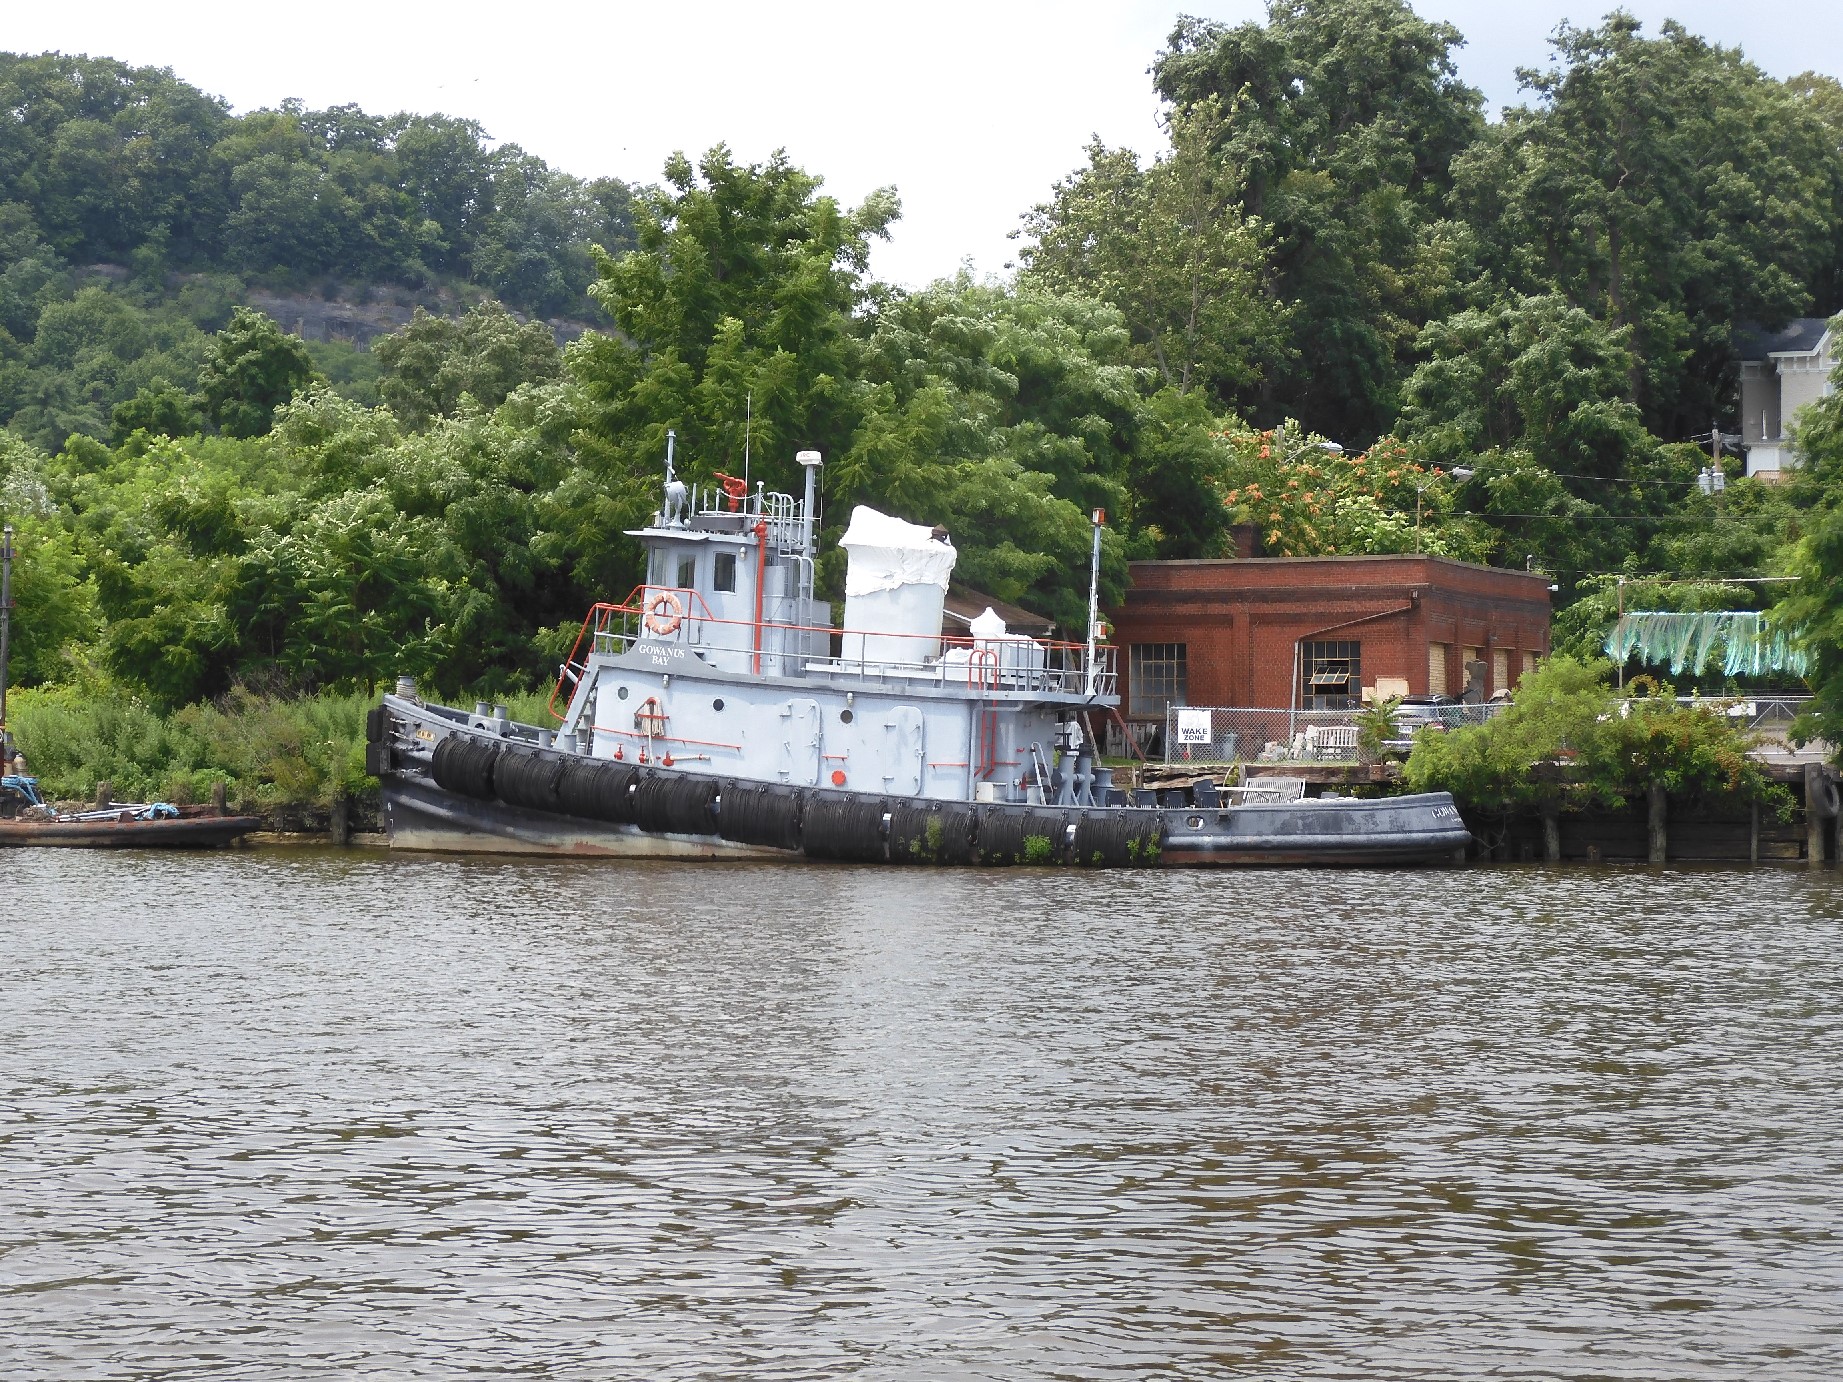 An old Tug in Roundout Creek